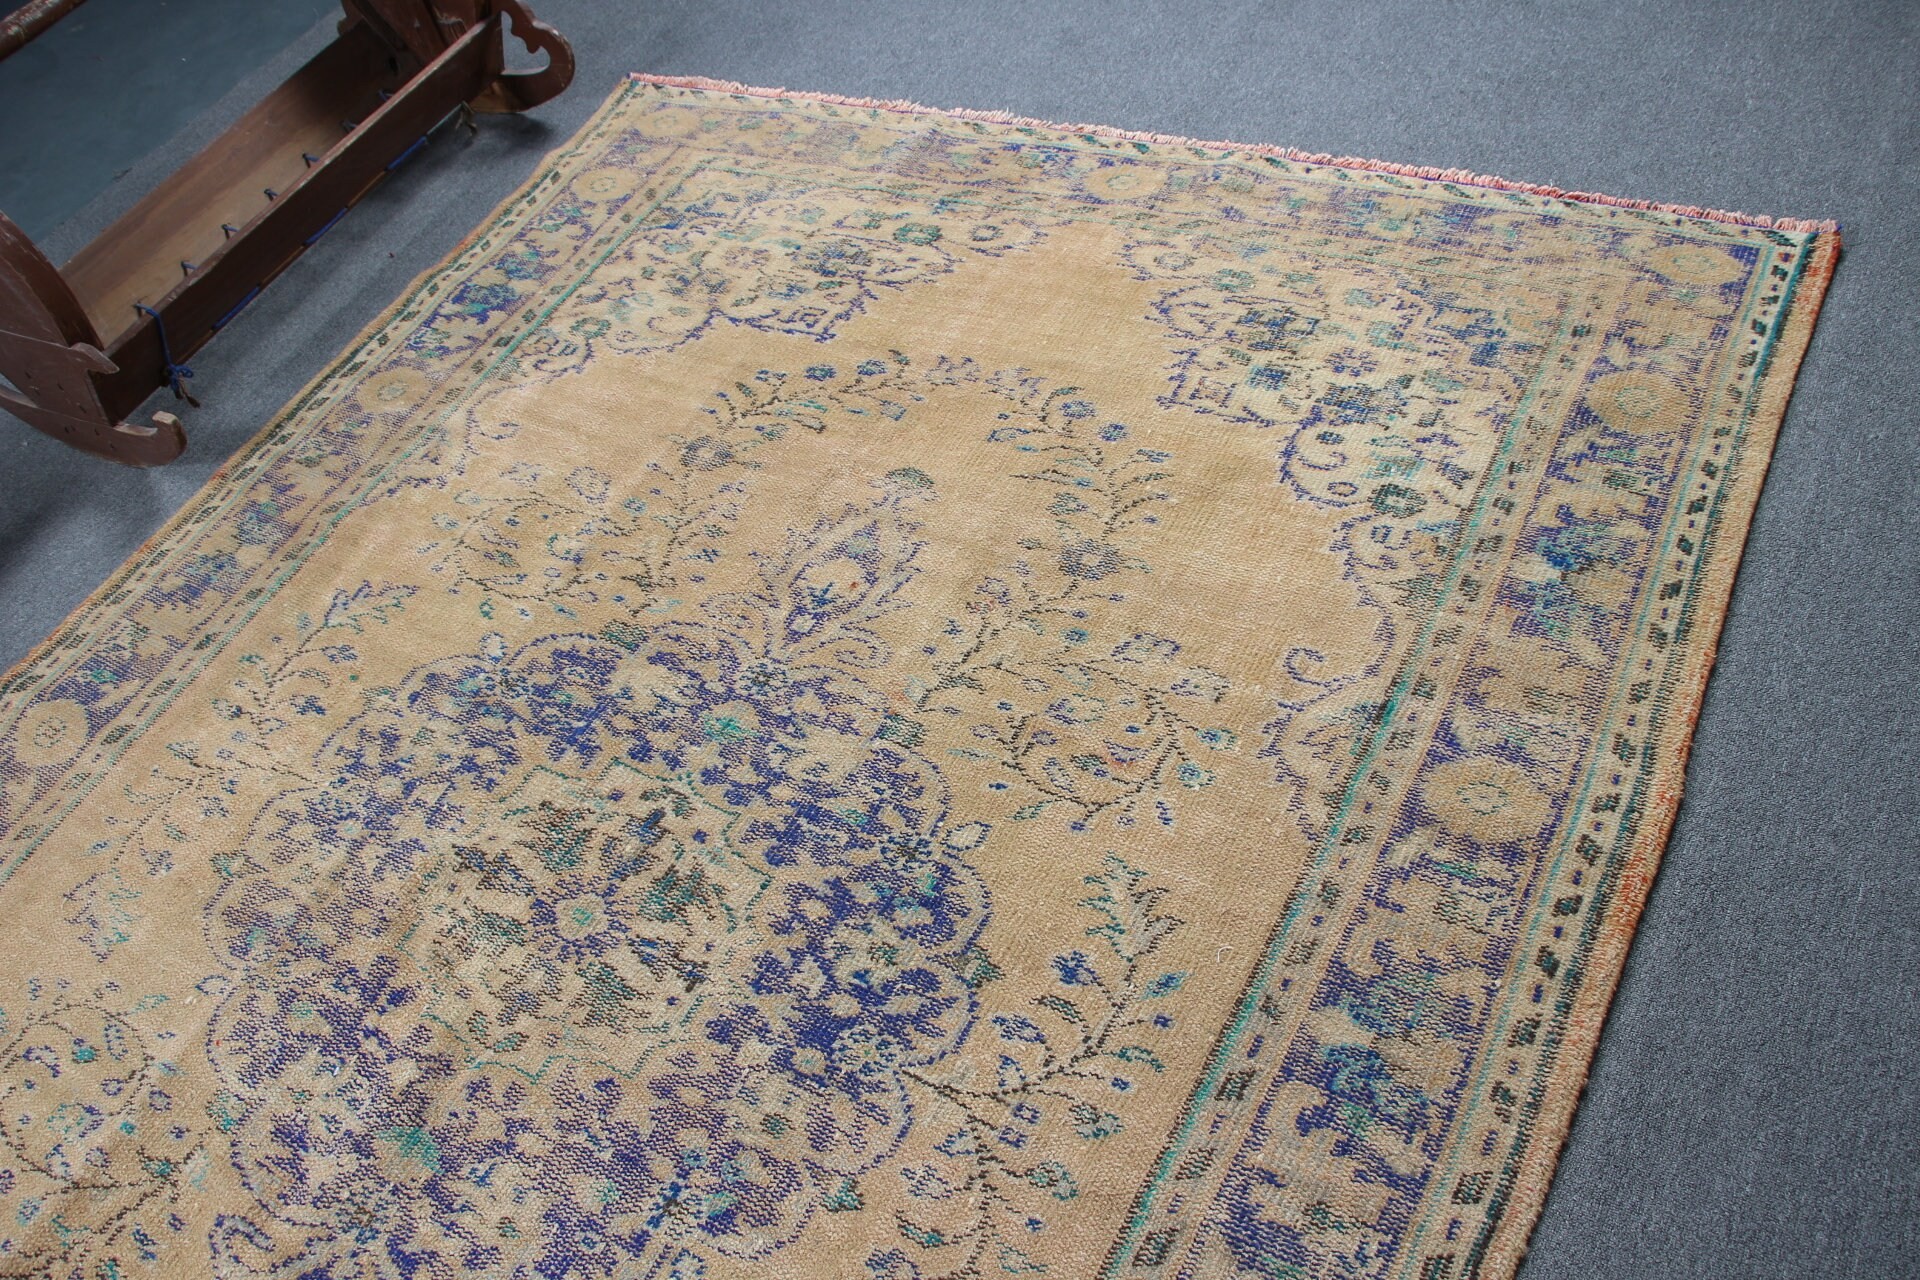 Moroccan Rugs, Salon Rug, Bright Rug, 6.4x9.4 ft Large Rugs, Brown Antique Rugs, Vintage Rug, Turkish Rug, Home Decor Rugs, Dining Room Rug